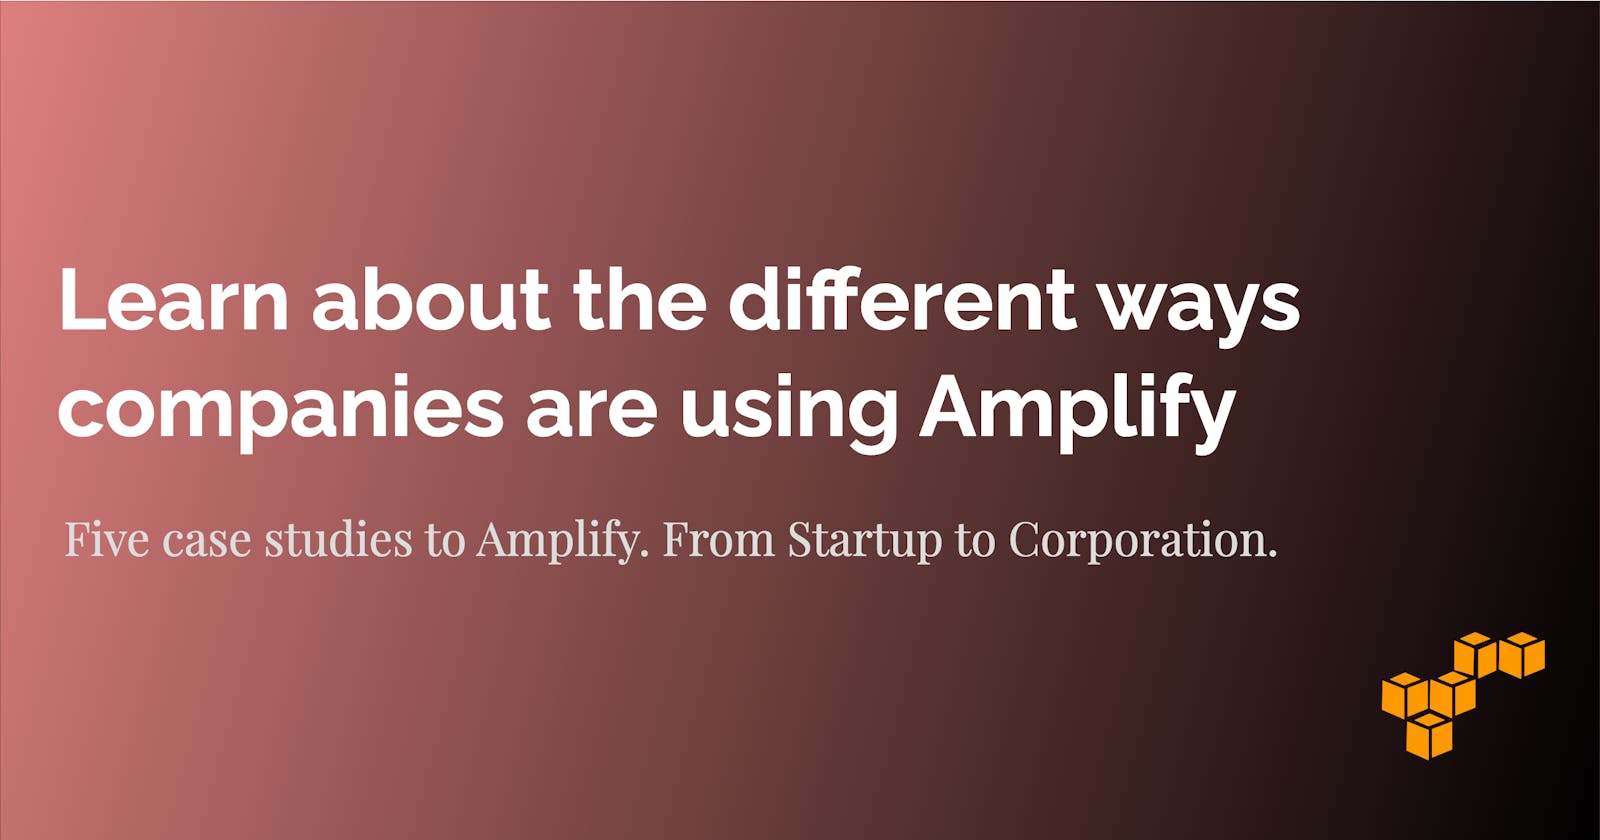 Learn about the different ways companies are using Amplify